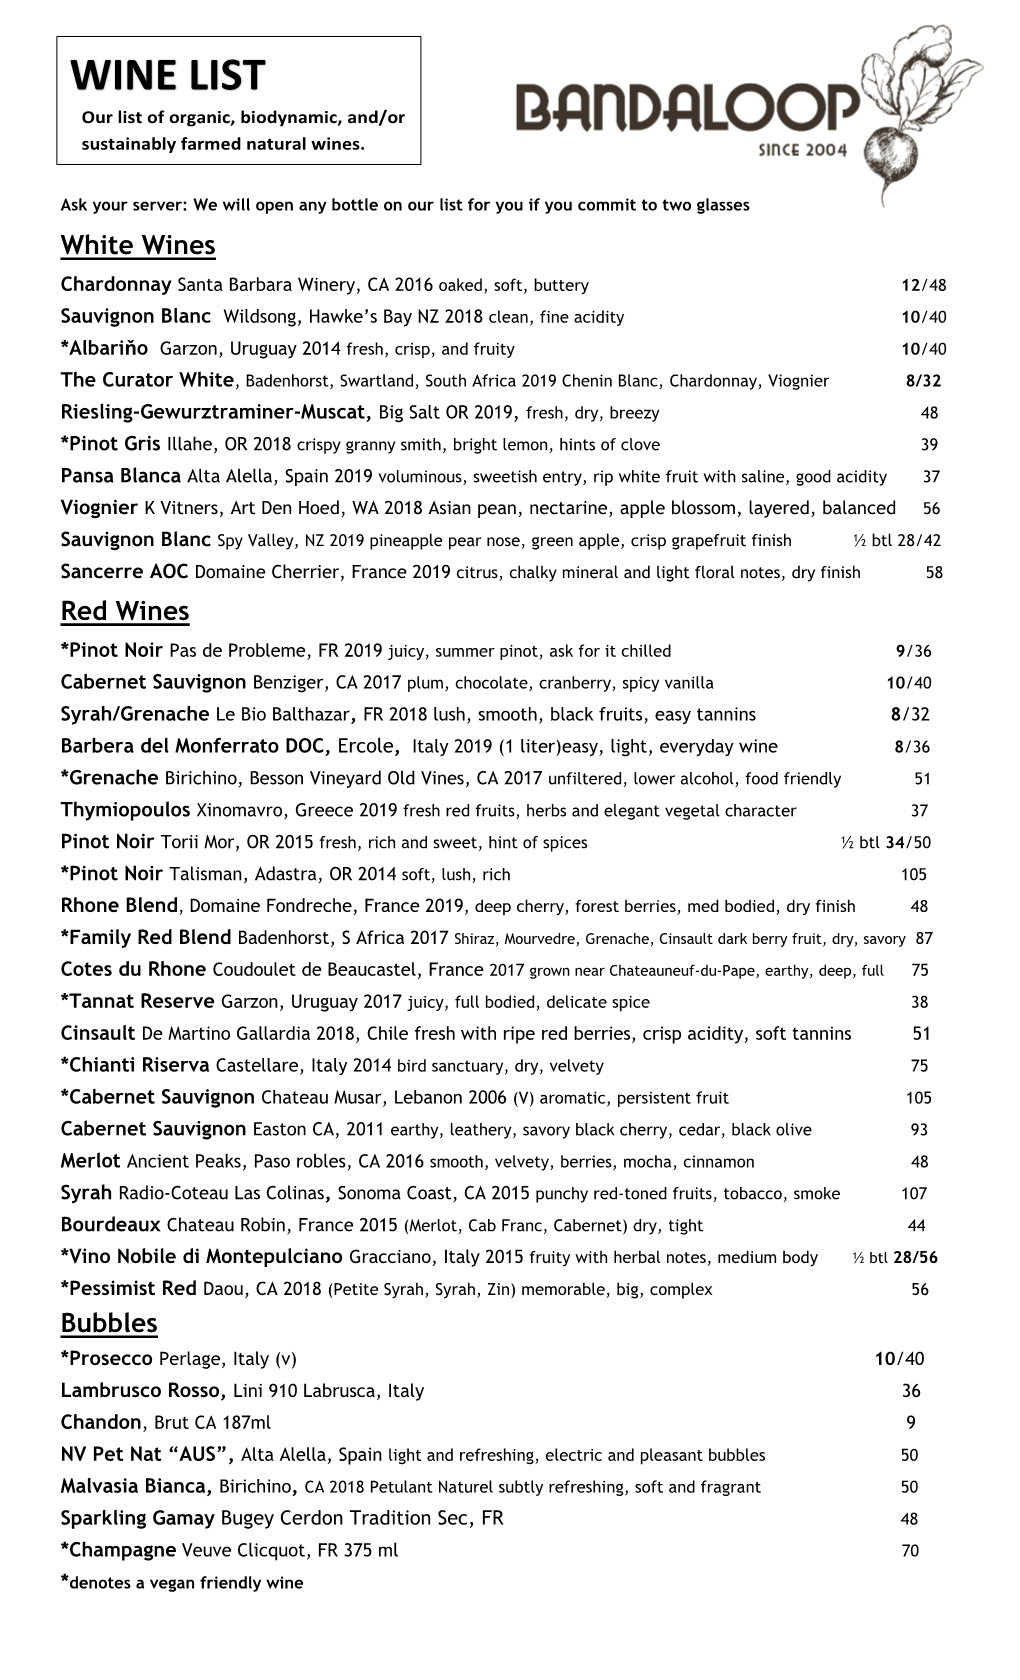 WINE LIST Our List of Organic, Biodynamic, And/Or Sustainably Farmed Natural Wines